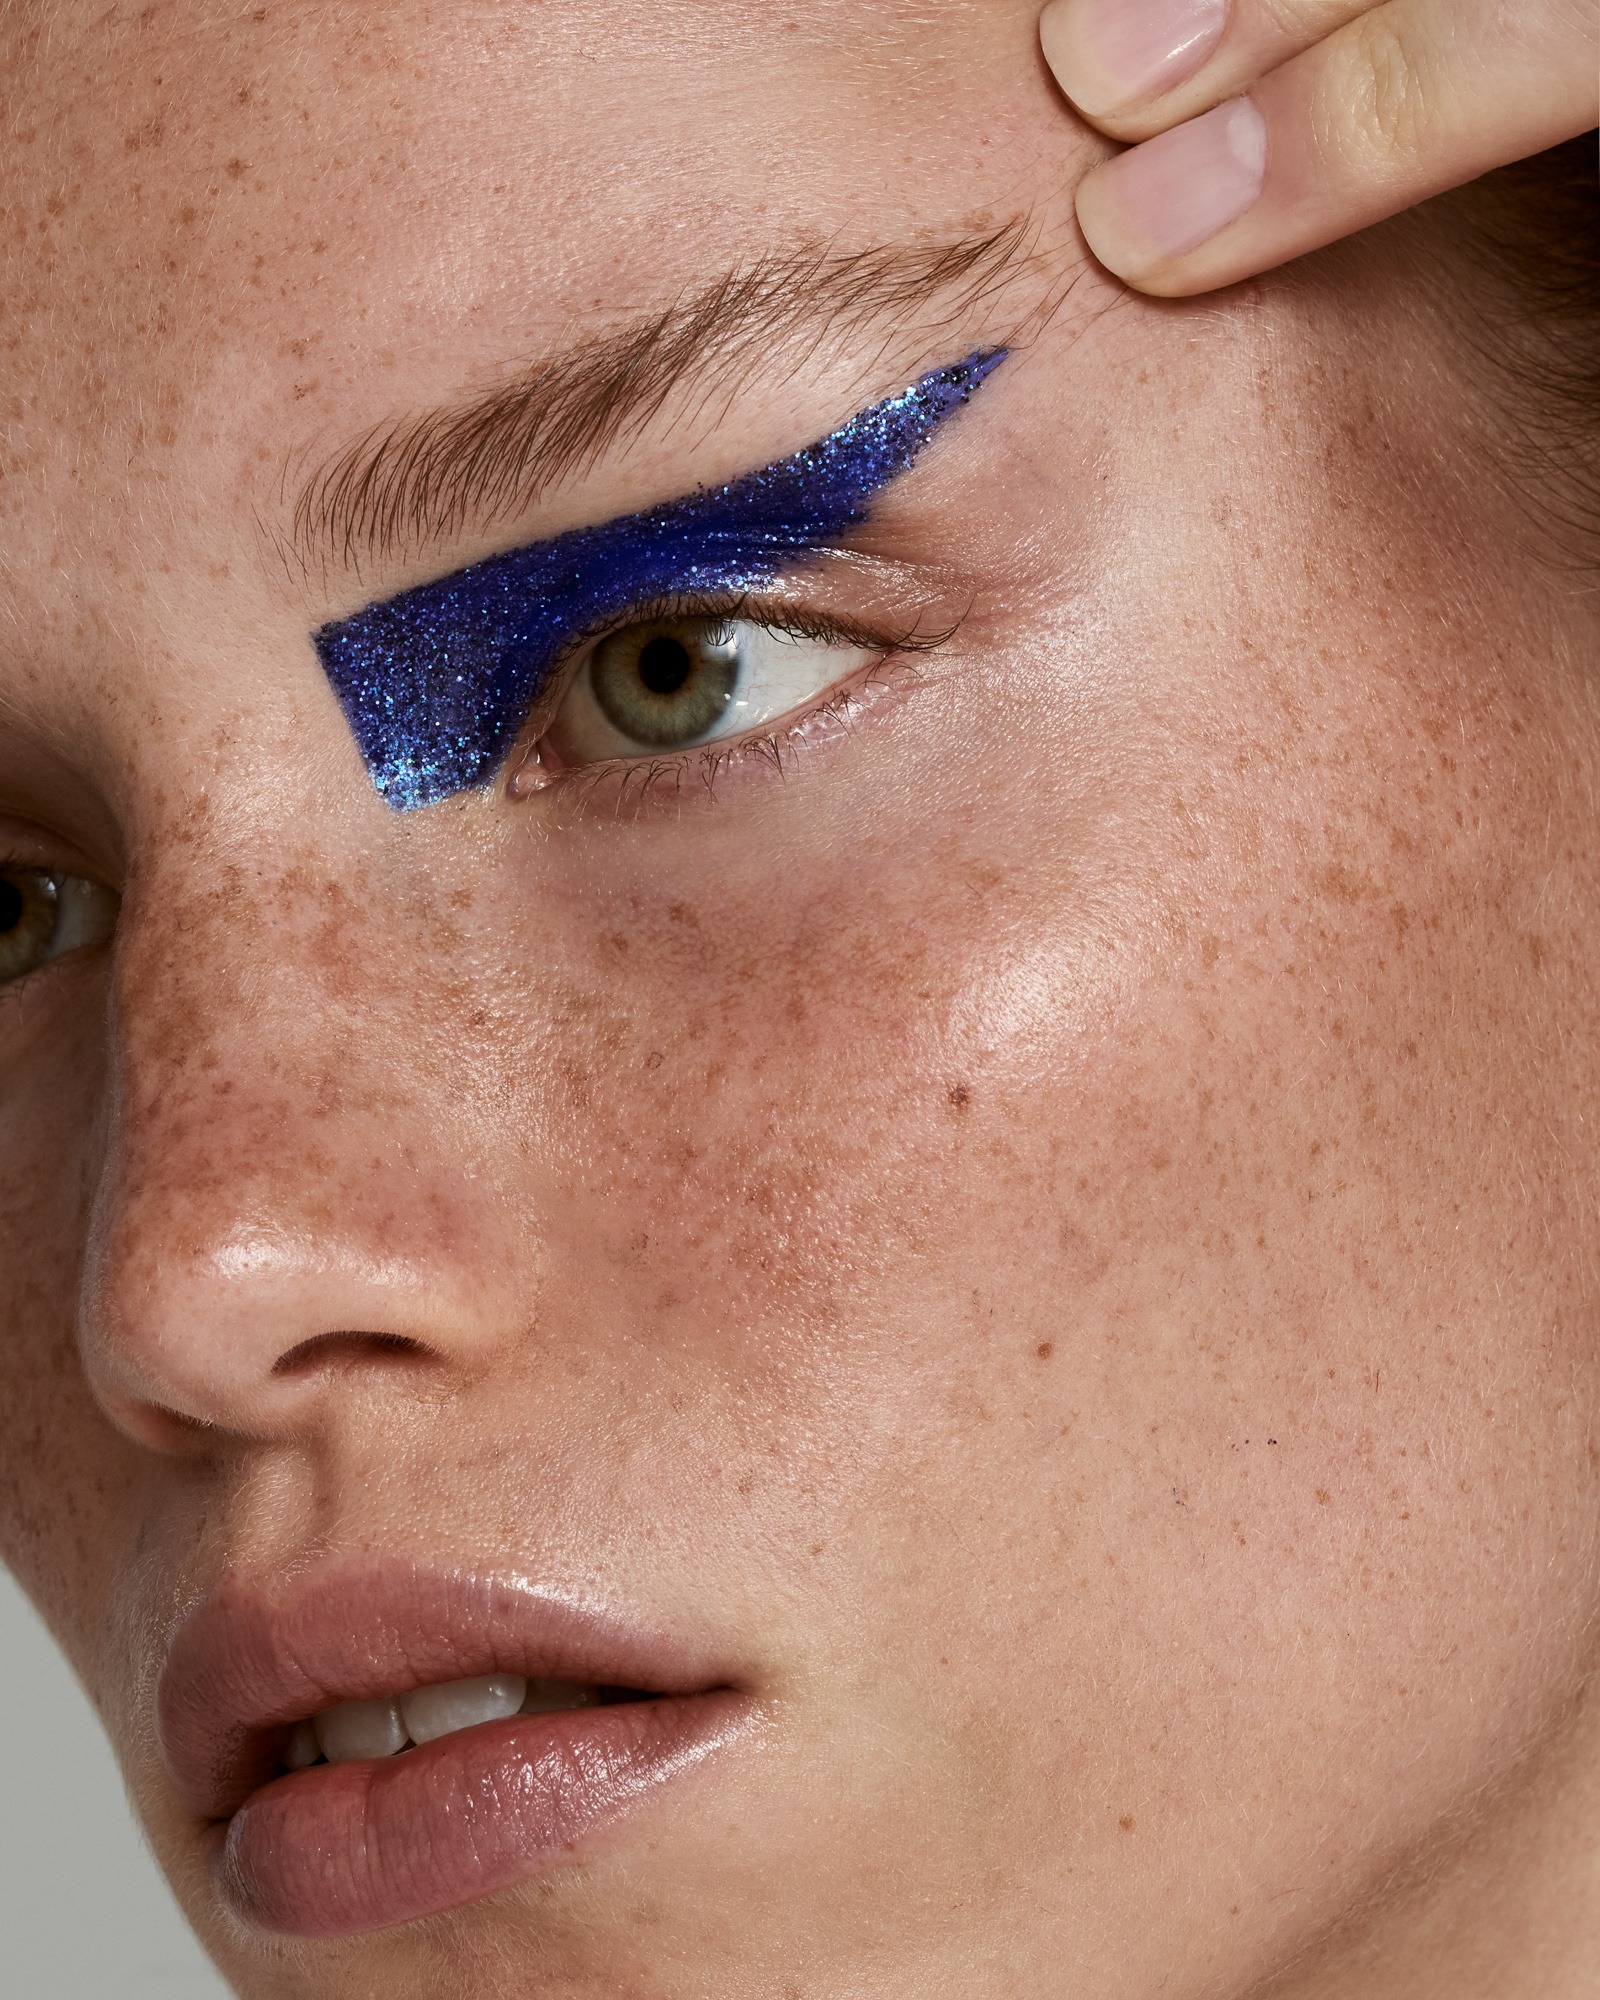 Blue Vogue.it 3 by Andreas ORTNER